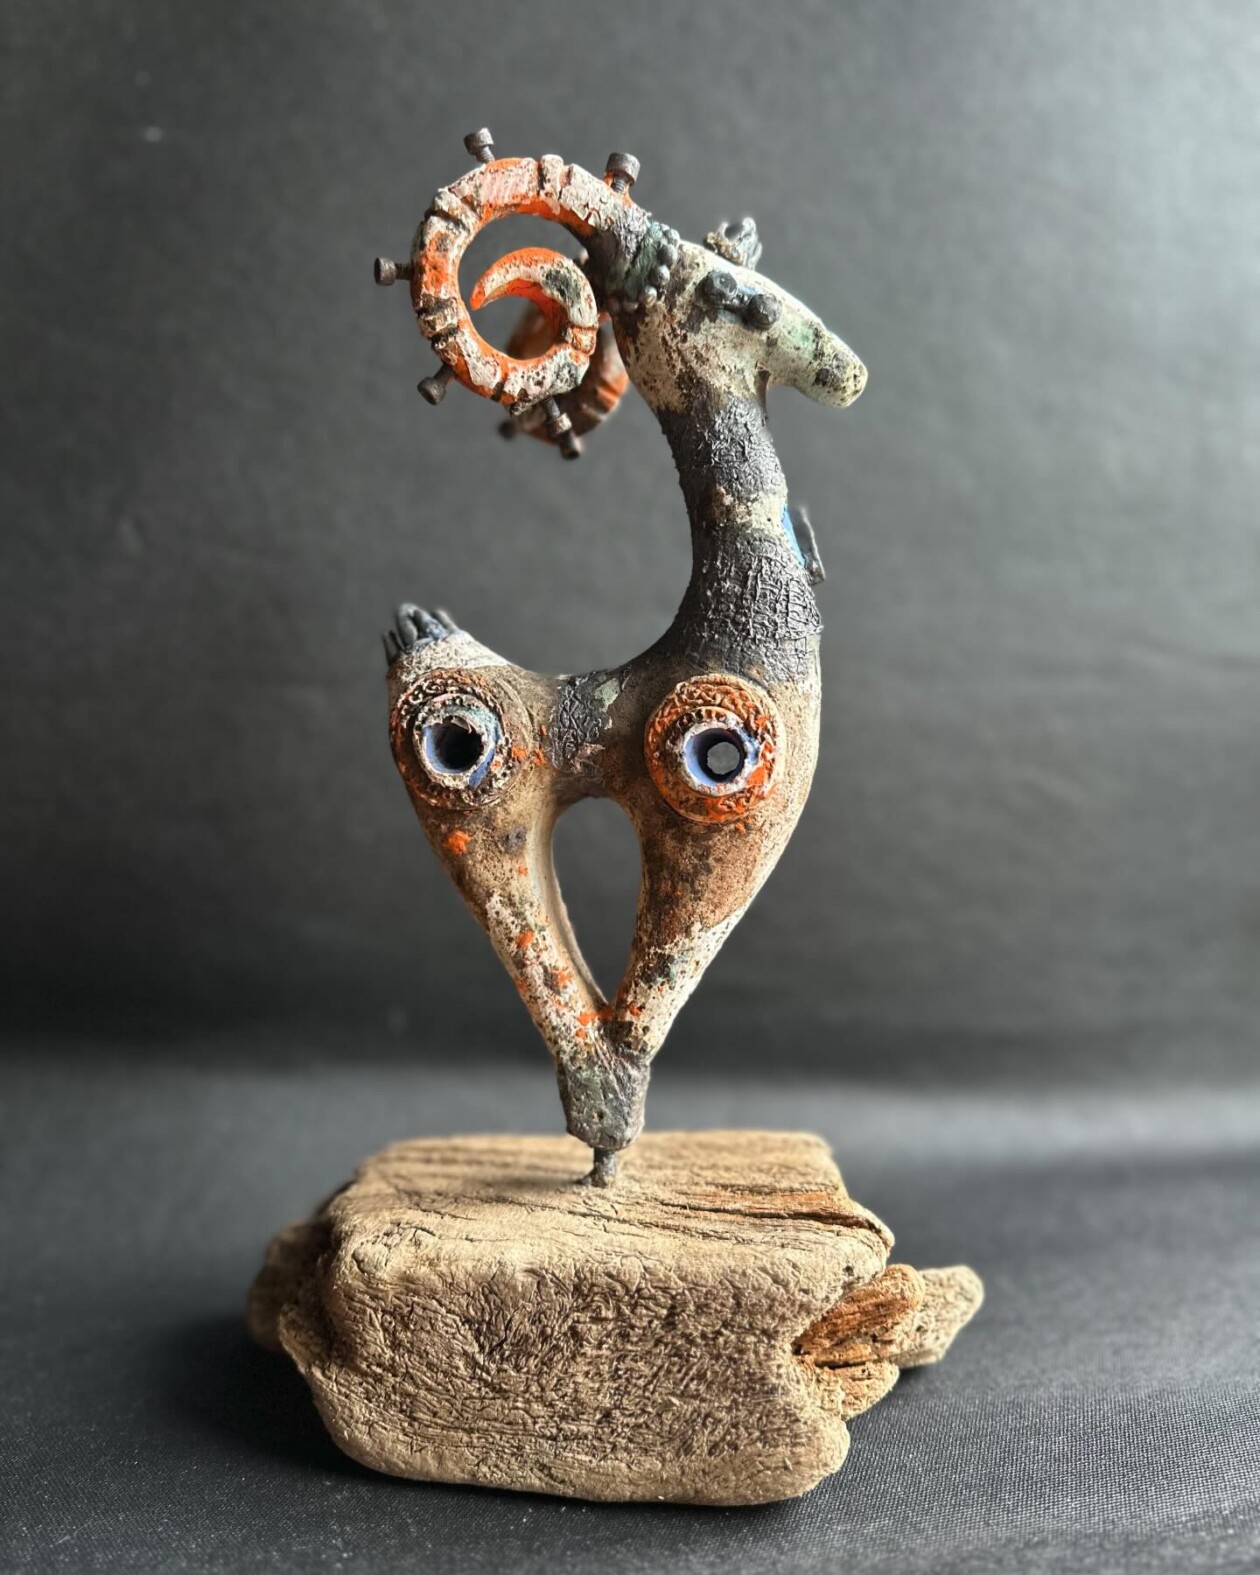 Fascinating Animal Ceramic Sculptures That Look Like Ancient Artifacts By Gul Sahin (8)